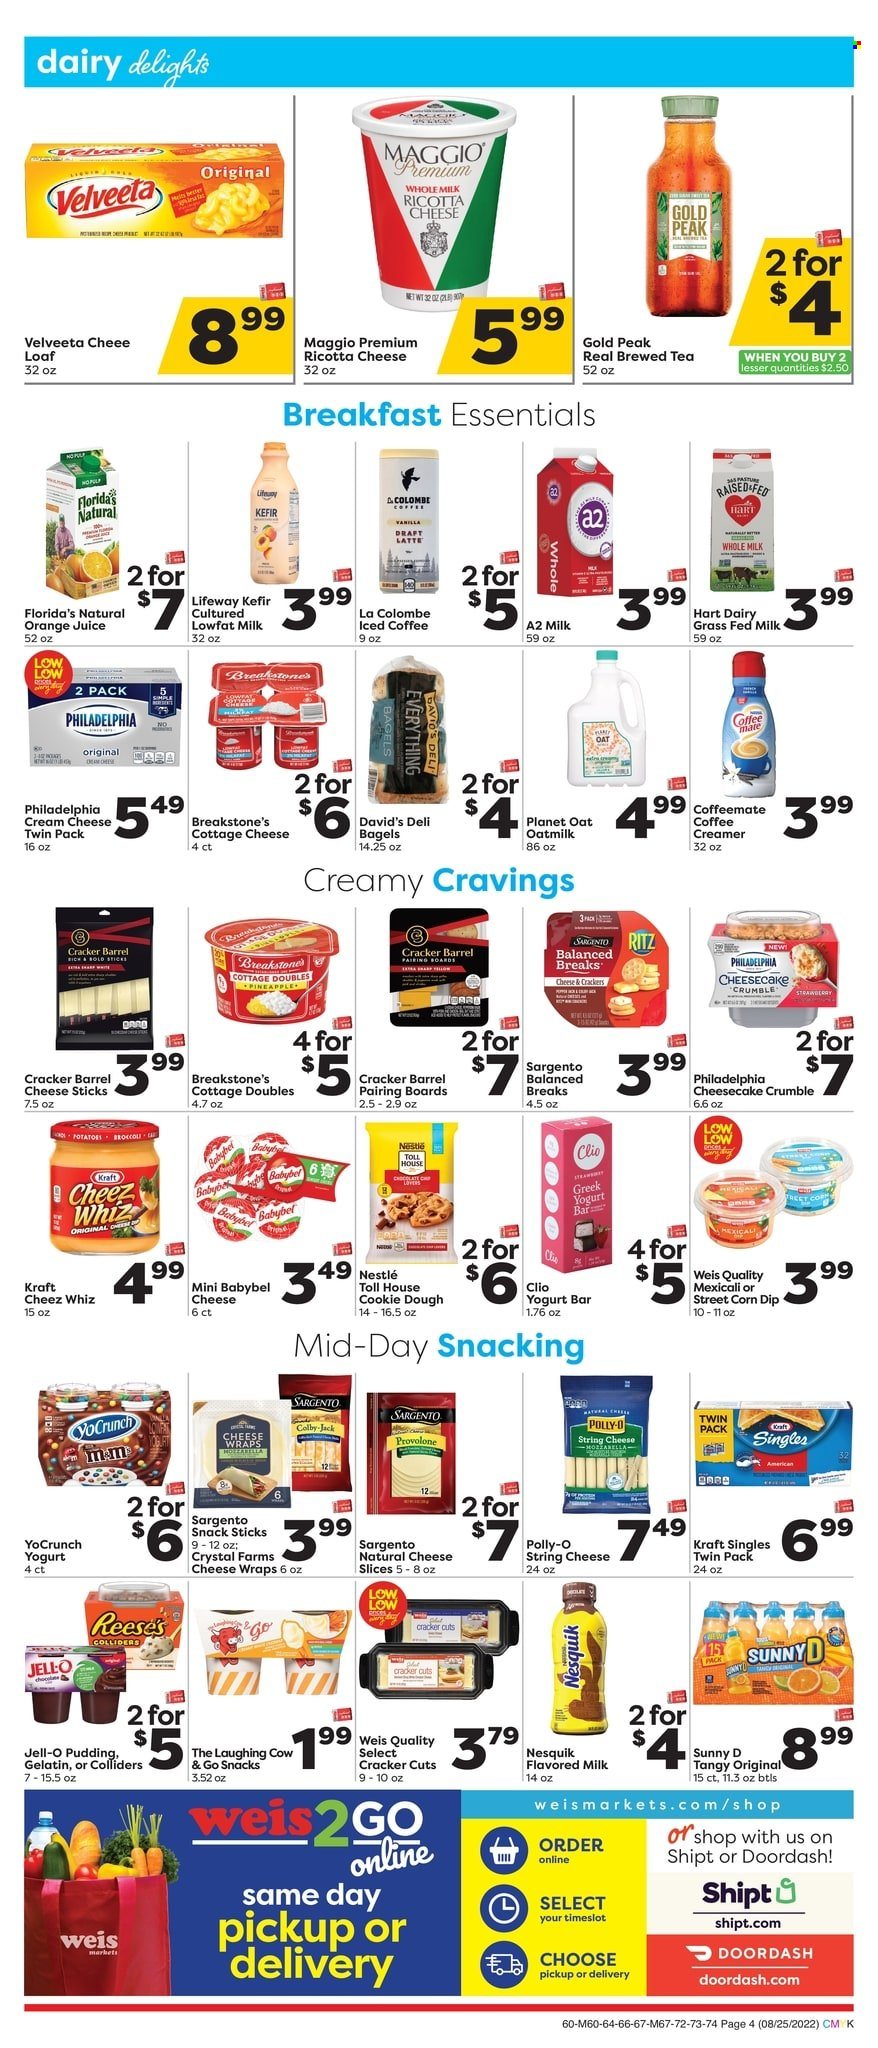 thumbnail - Weis Flyer - 08/25/2022 - 10/05/2022 - Sales products - bagels, wraps, broccoli, potatoes, pineapple, Kraft®, Colby cheese, cottage cheese, mozzarella, ricotta, sandwich slices, sliced cheese, string cheese, Philadelphia, The Laughing Cow, Babybel, Kraft Singles, Sargento, greek yoghurt, pudding, Nesquik, milk, flavoured milk, kefir, oat milk, creamer, dip, cheese sticks, cookie dough, Nestlé, chocolate, snack, crackers, Ego, Florida's Natural, RITZ, Jell-O, orange juice, juice, iced coffee, tea. Page 4.